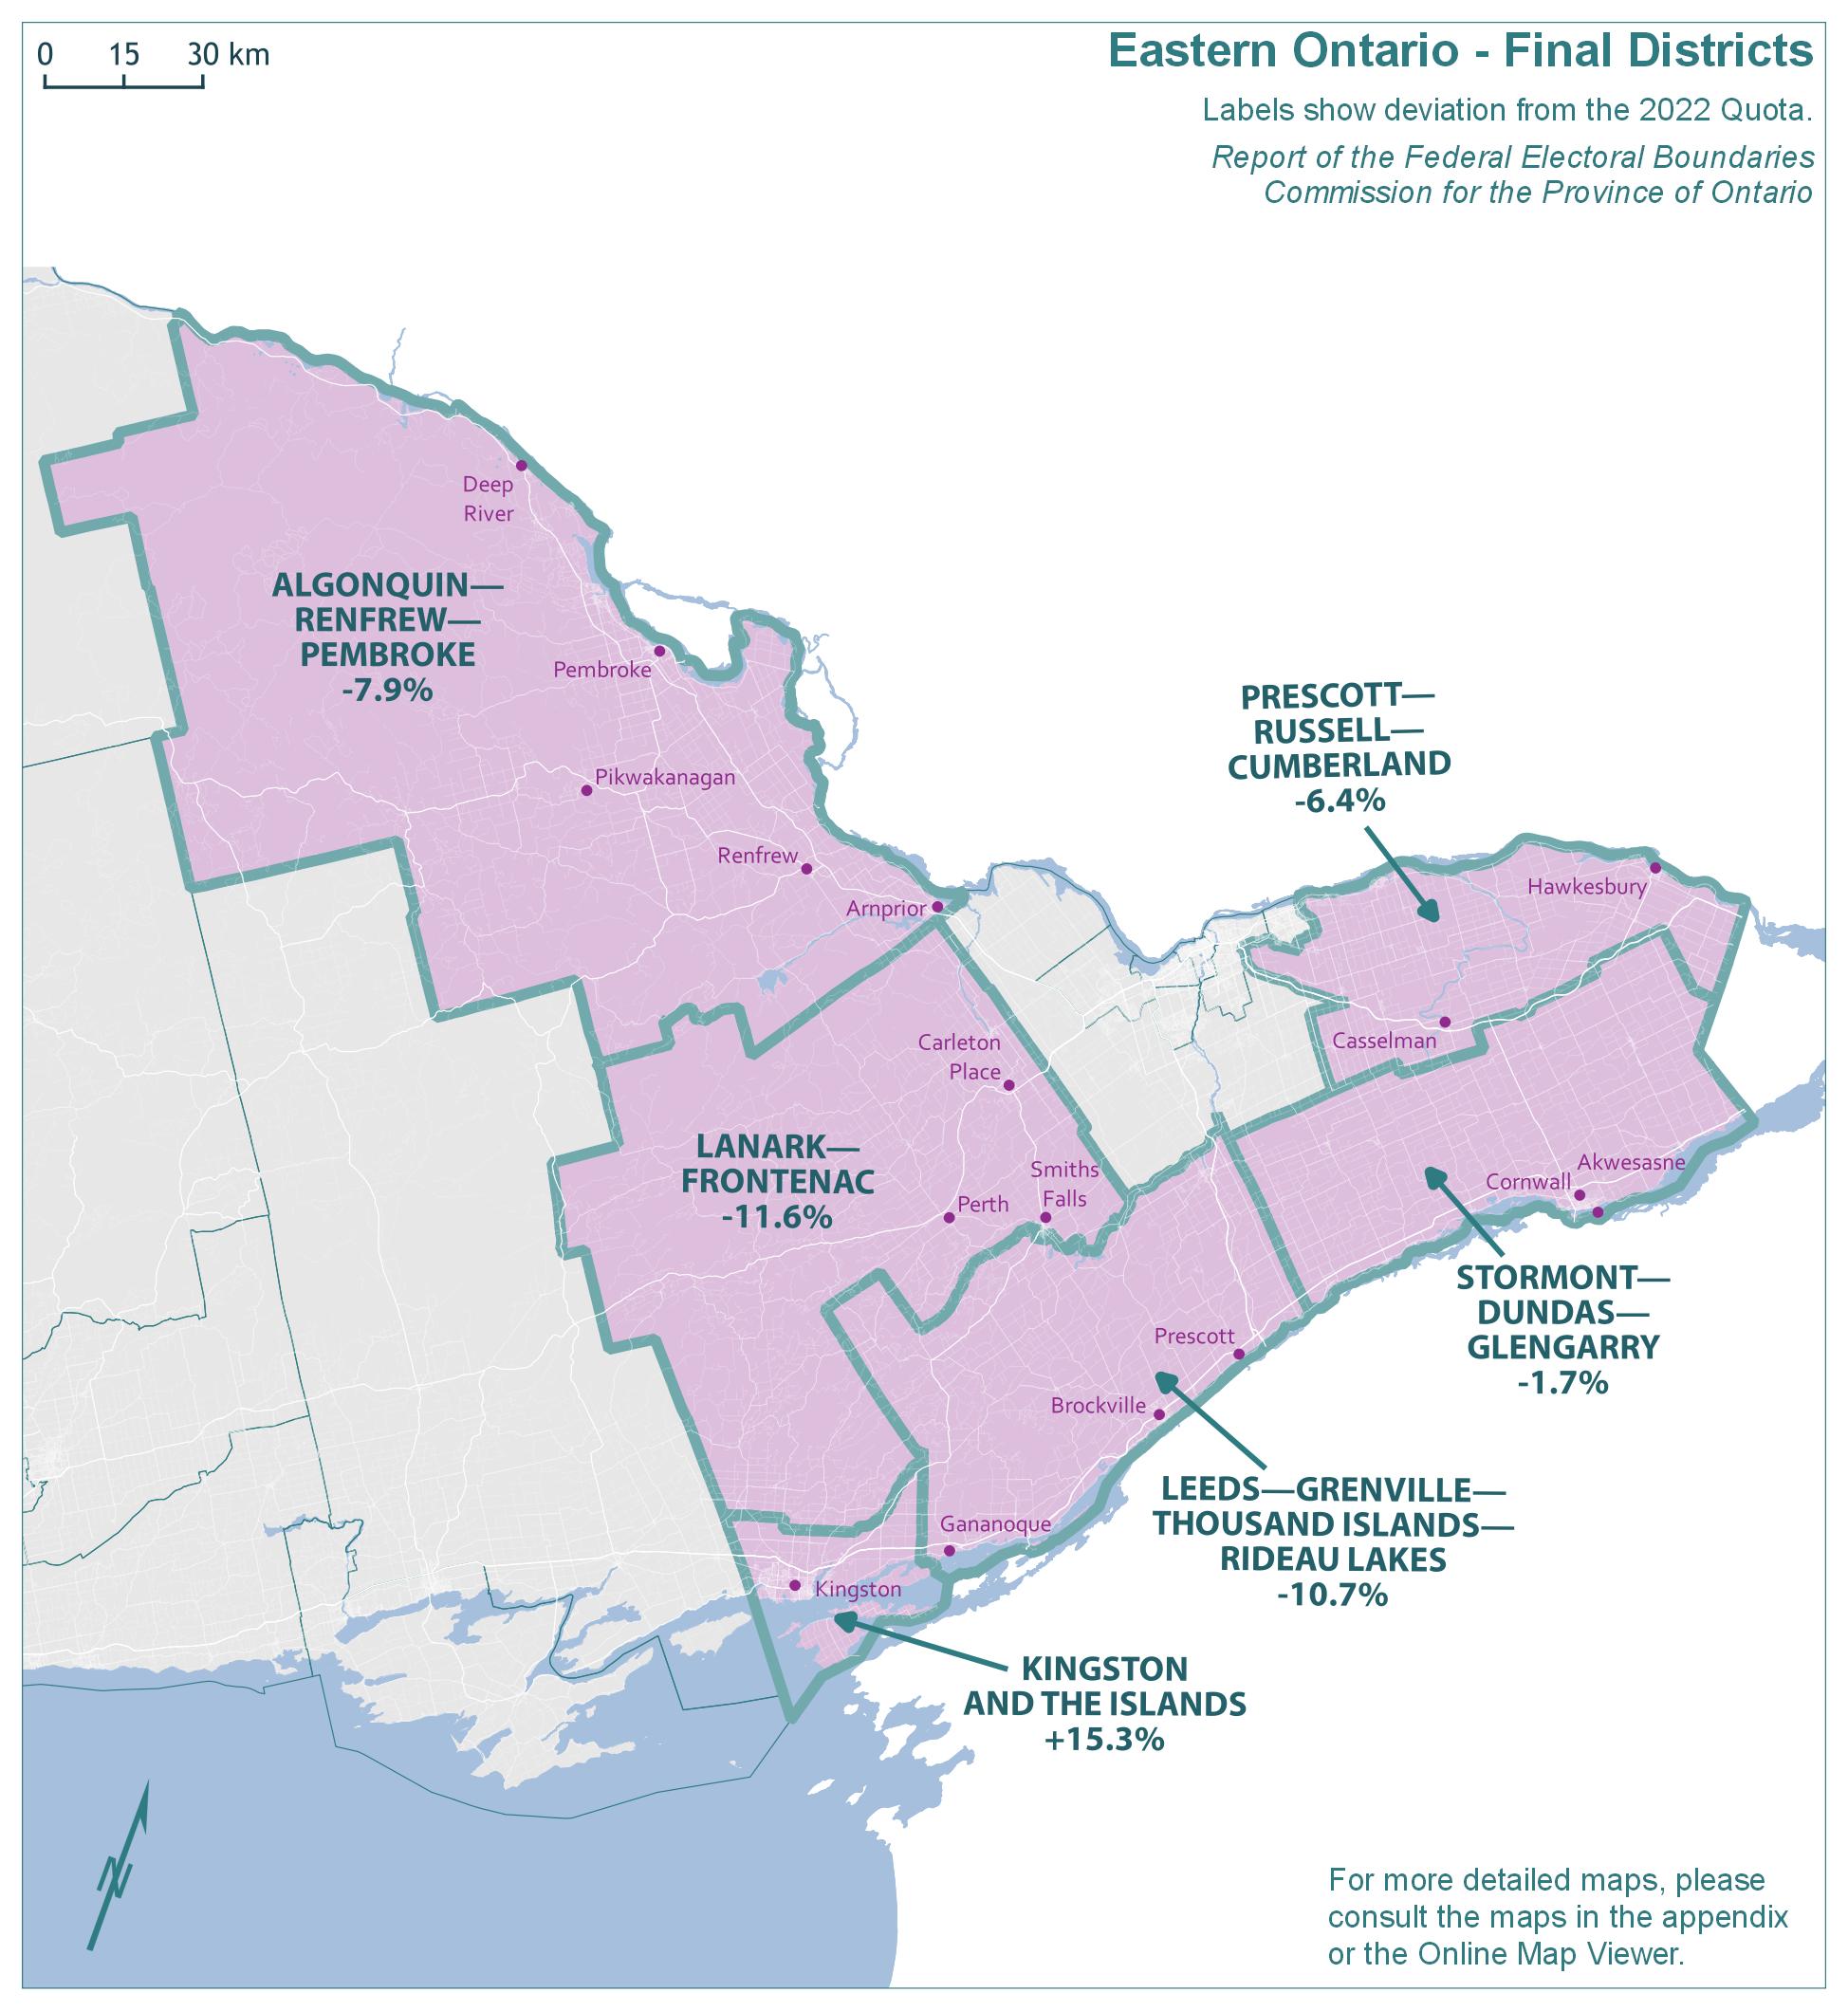 Eastern Ontario - Final Districts